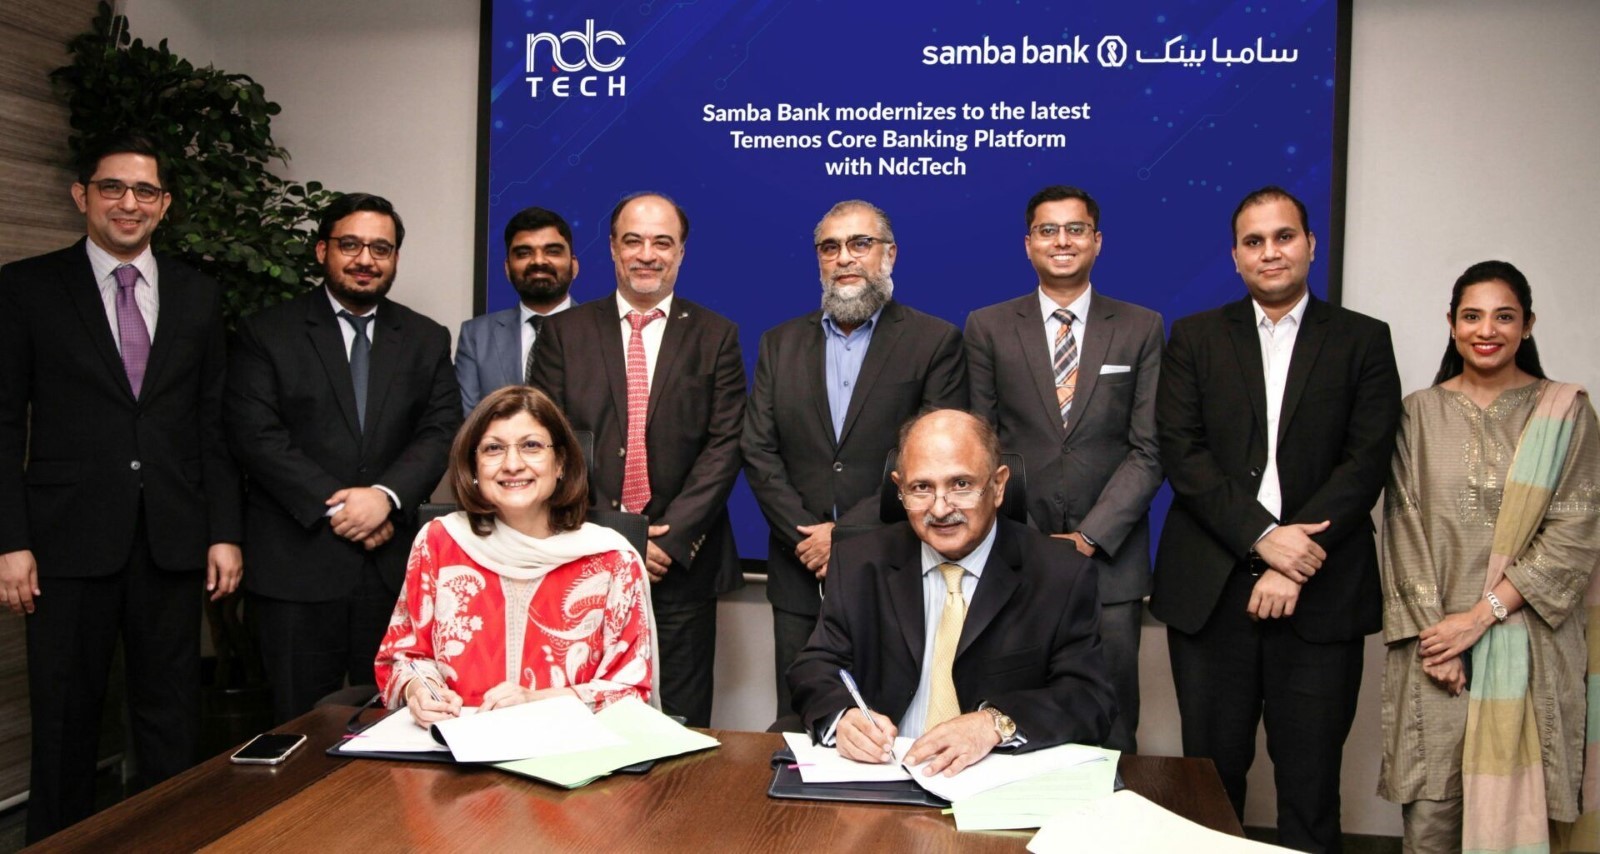 The picture shows the signing ceremony, with Mr. Shahid Sattar, CEO & President Samba Bank, (right) & Ms. Ammara Masood, CEO & President NdcTech, (left) along with senior executives of both organizations